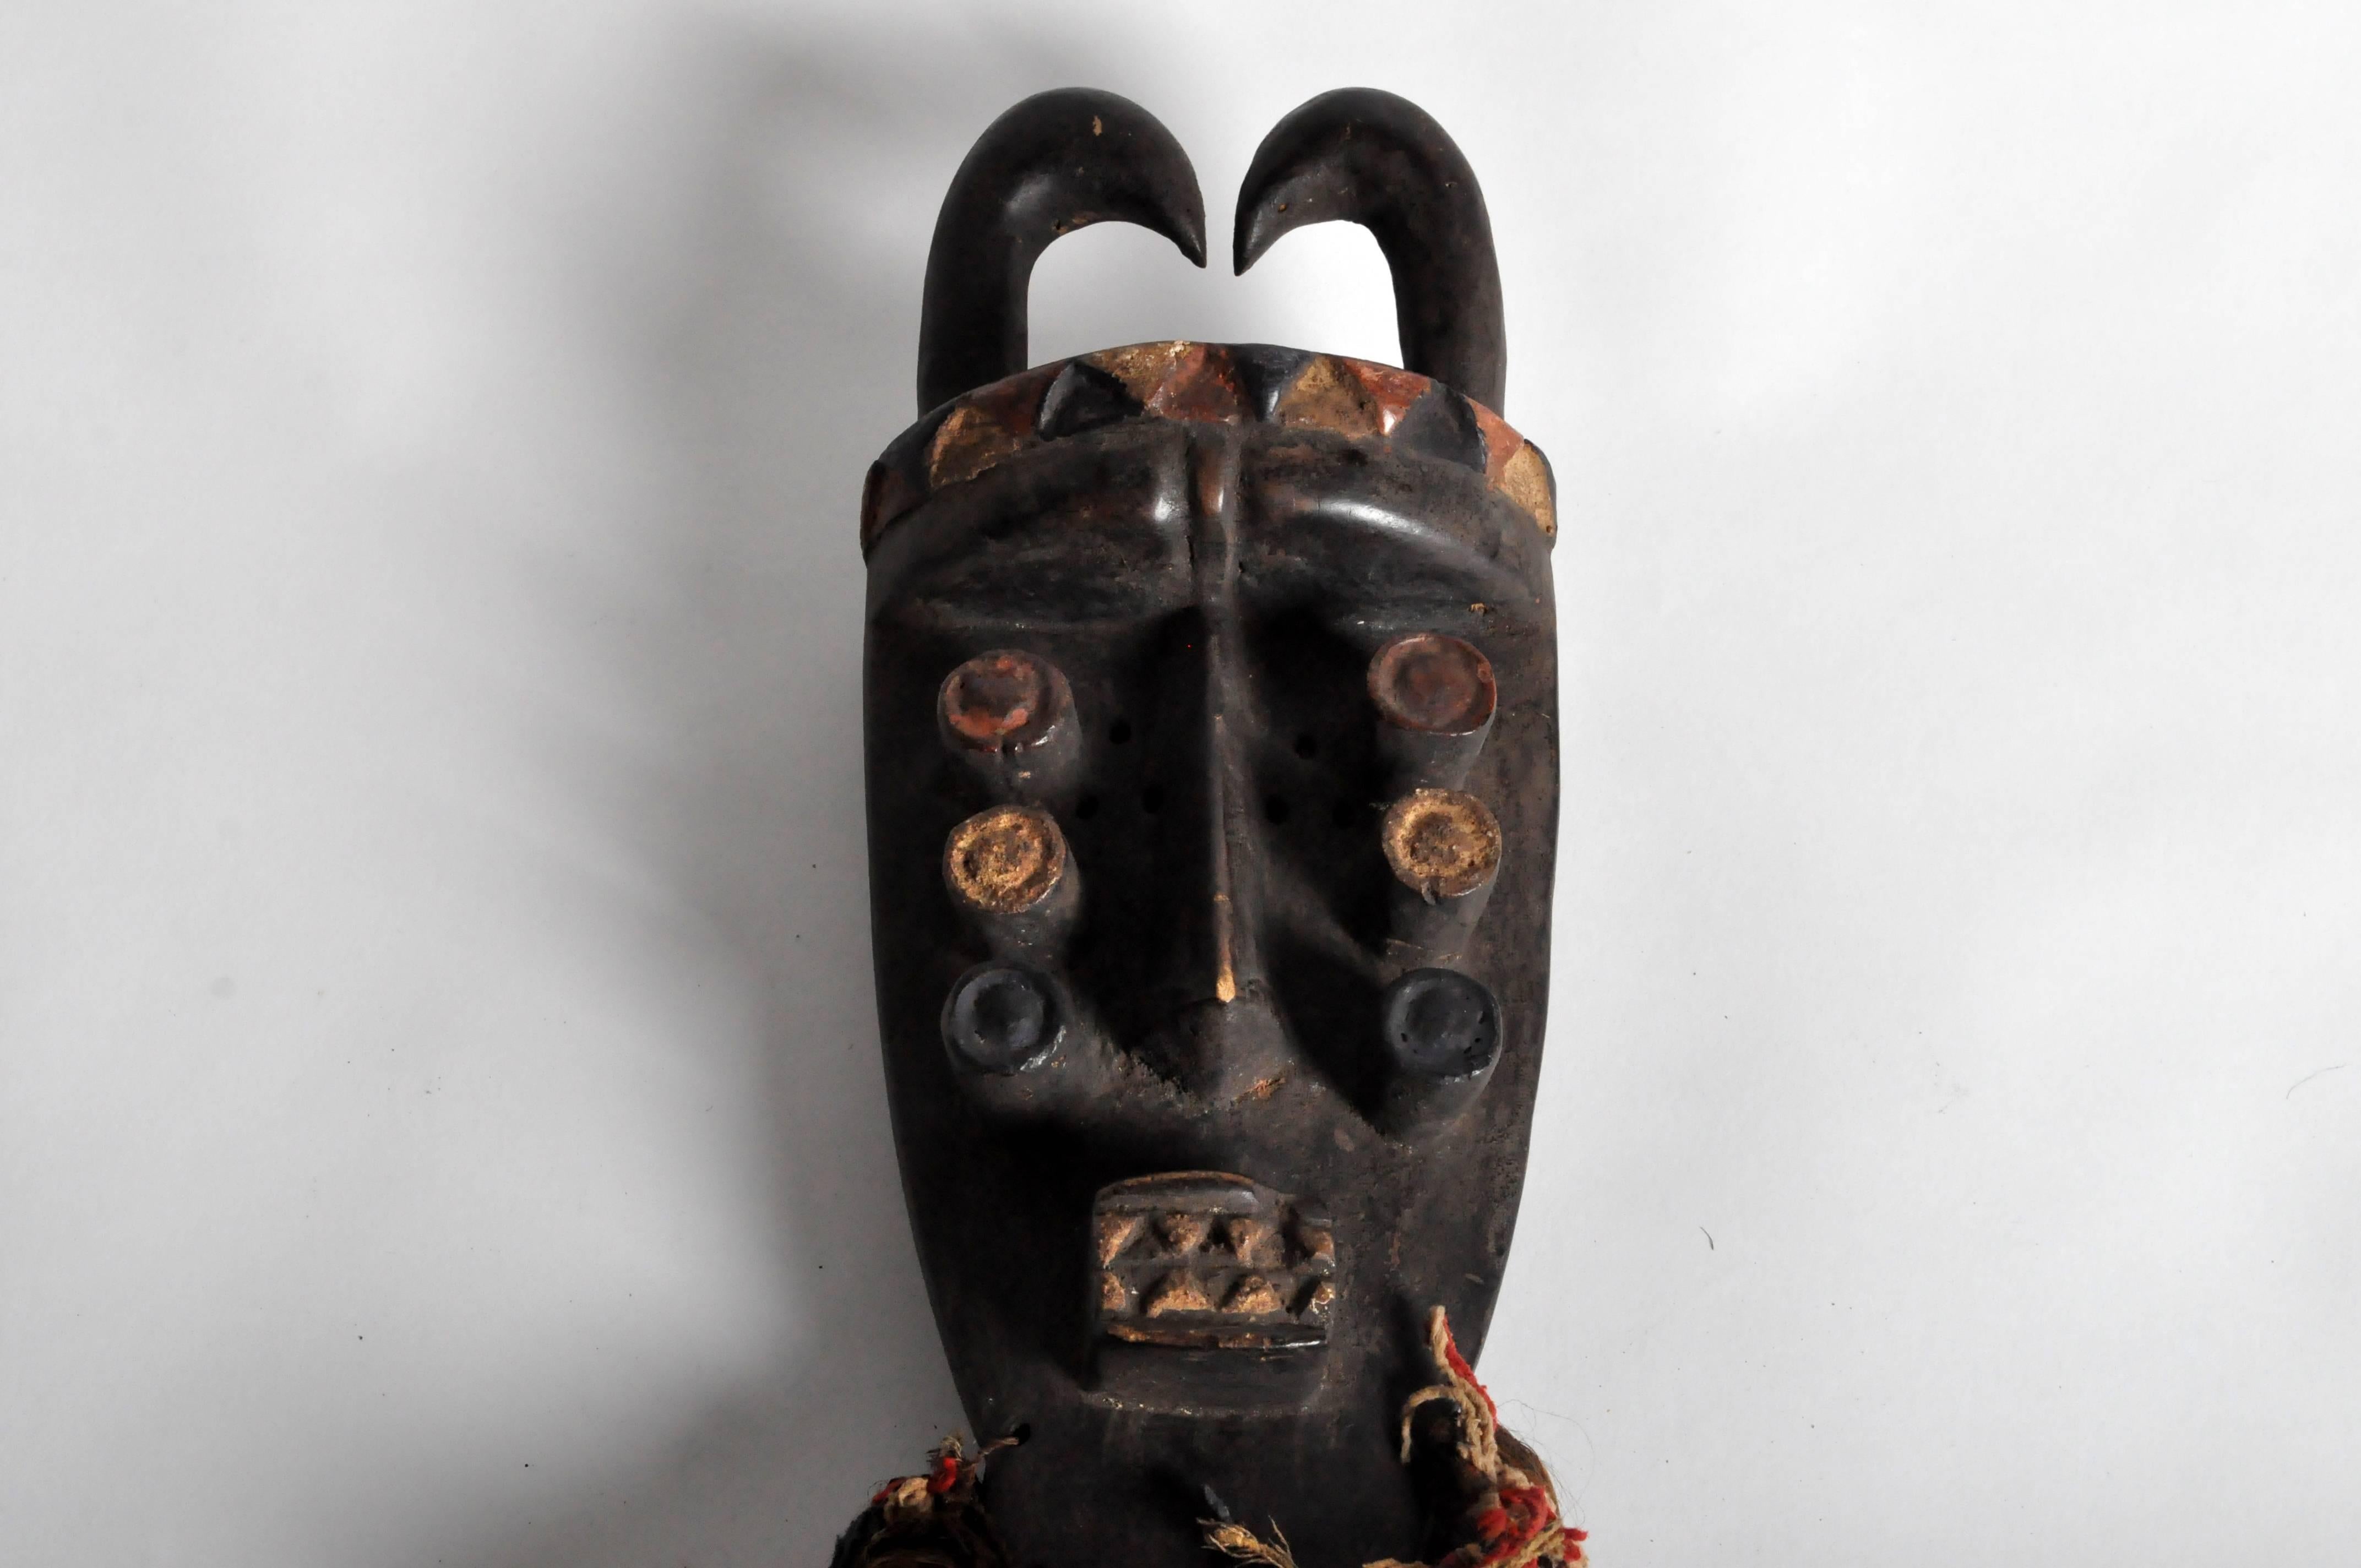 This wooden Grebo Tribe mask is from the Cote D'lvoire, circa 1950. The Grebo people is a term used to refer to an ethnic group or subgroup within the larger Kru group of West Africa, a language and cultural ethnicity, and to certain of its